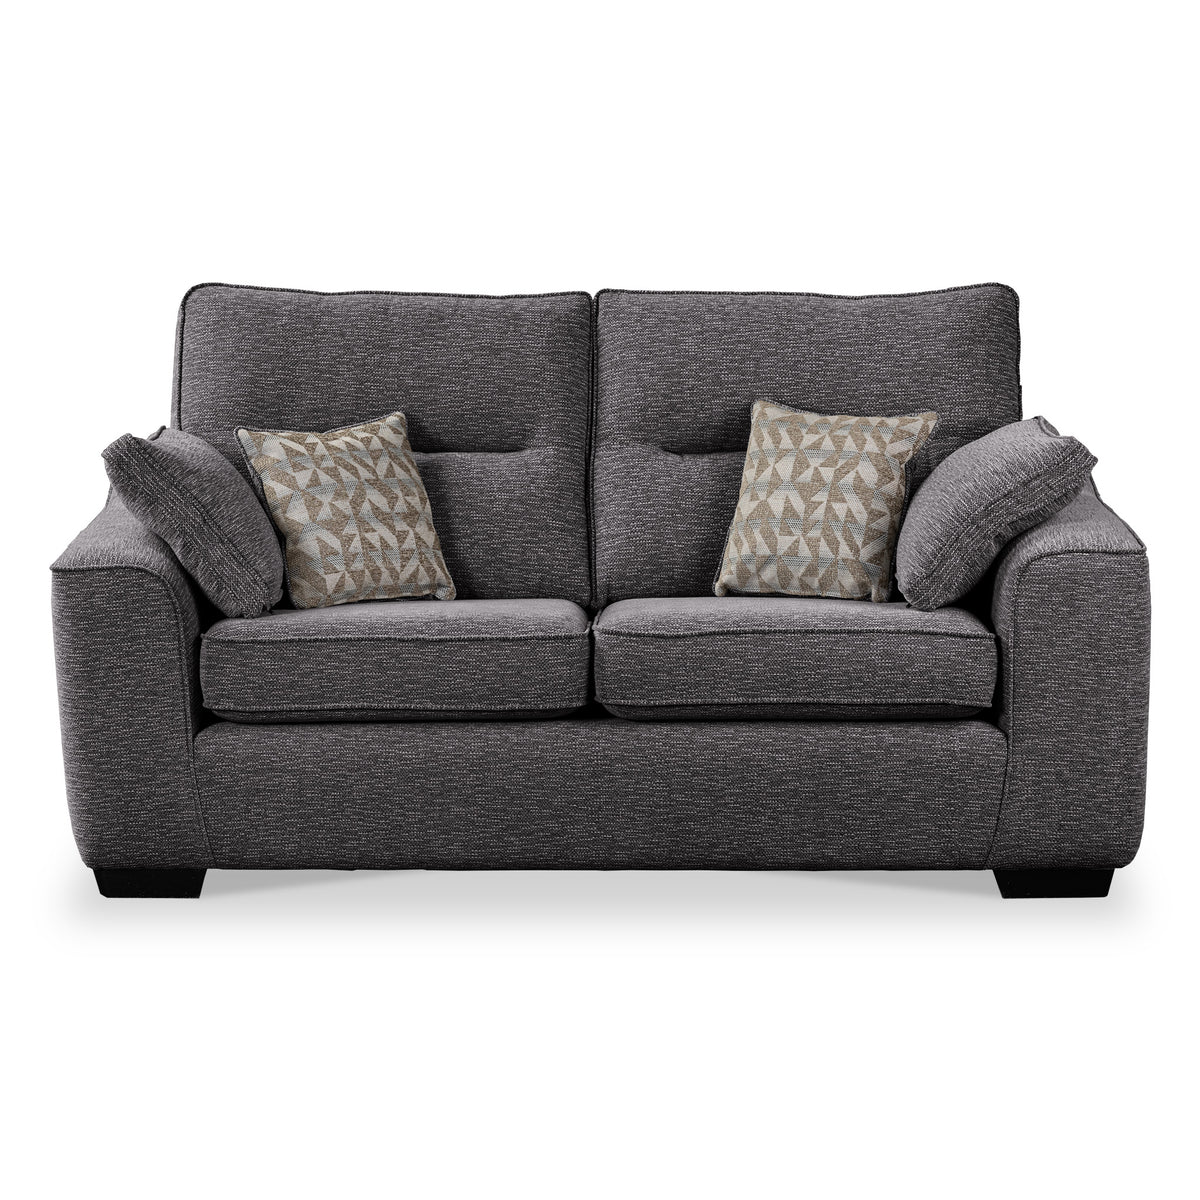 Sudbury Charcoal 2 Seater Sofabed with Taupe Scatter Cushions